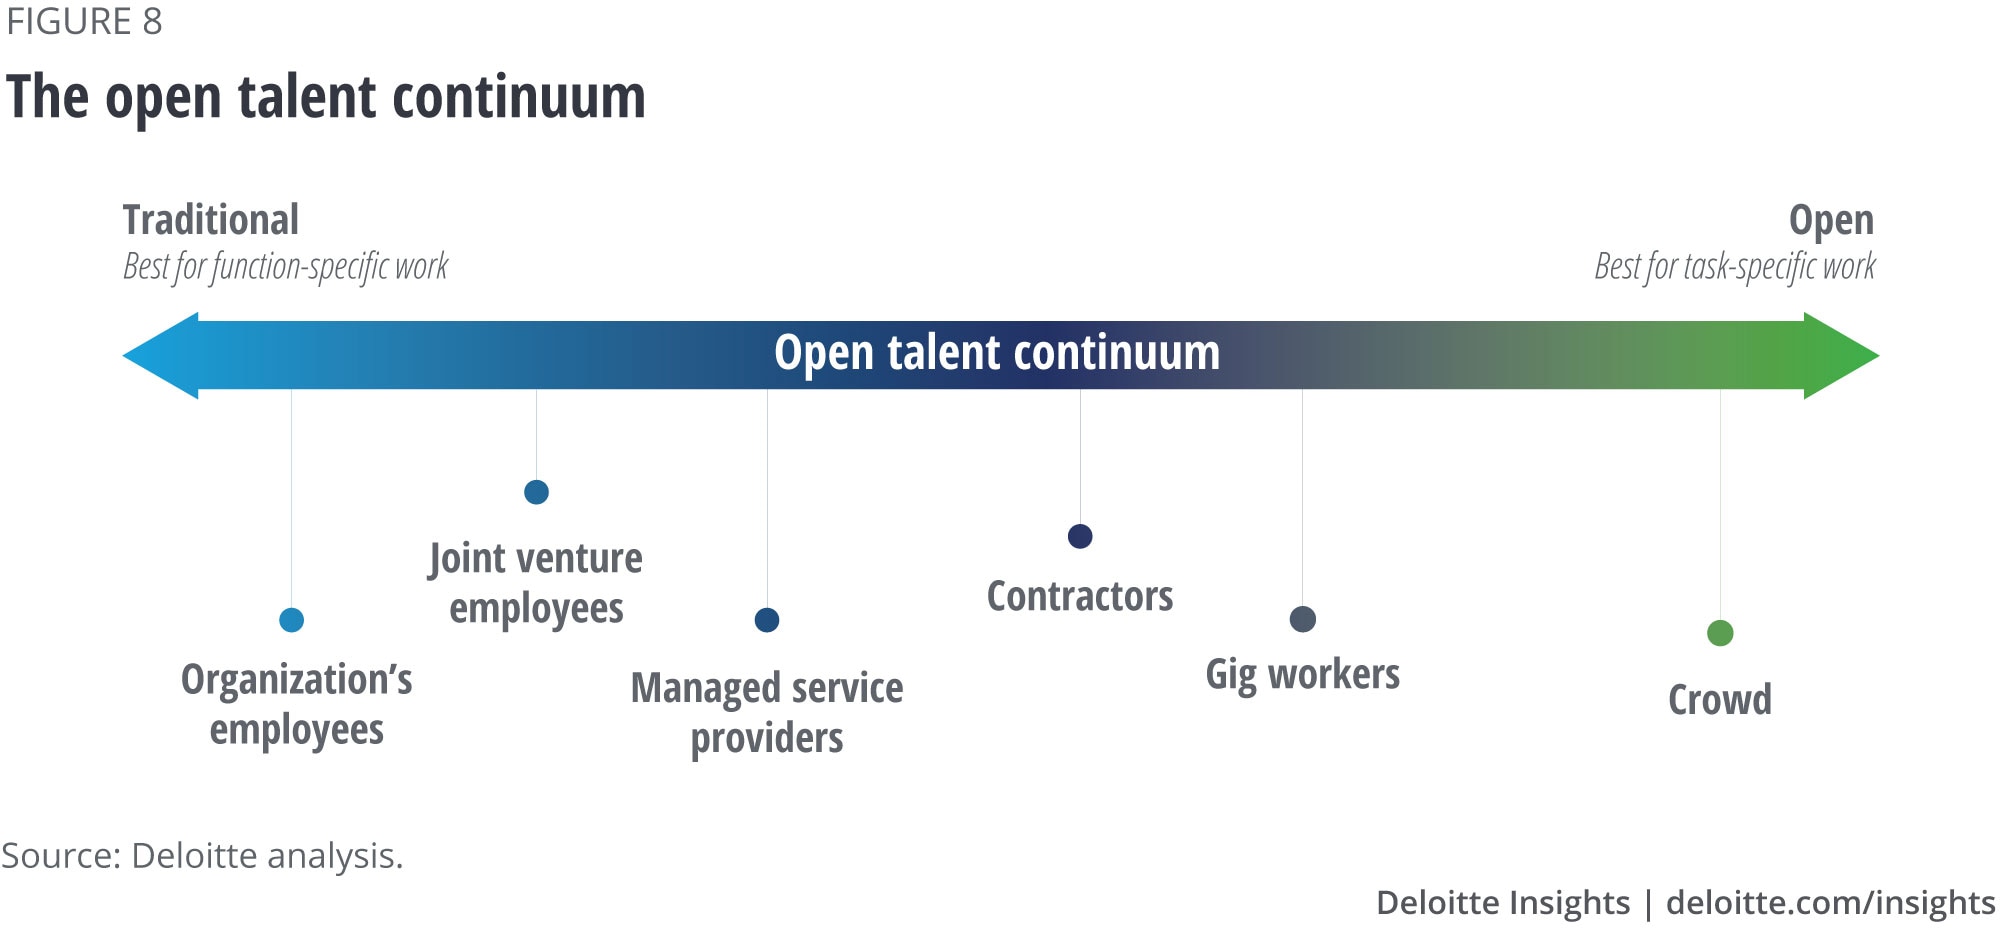 The open talent continuum